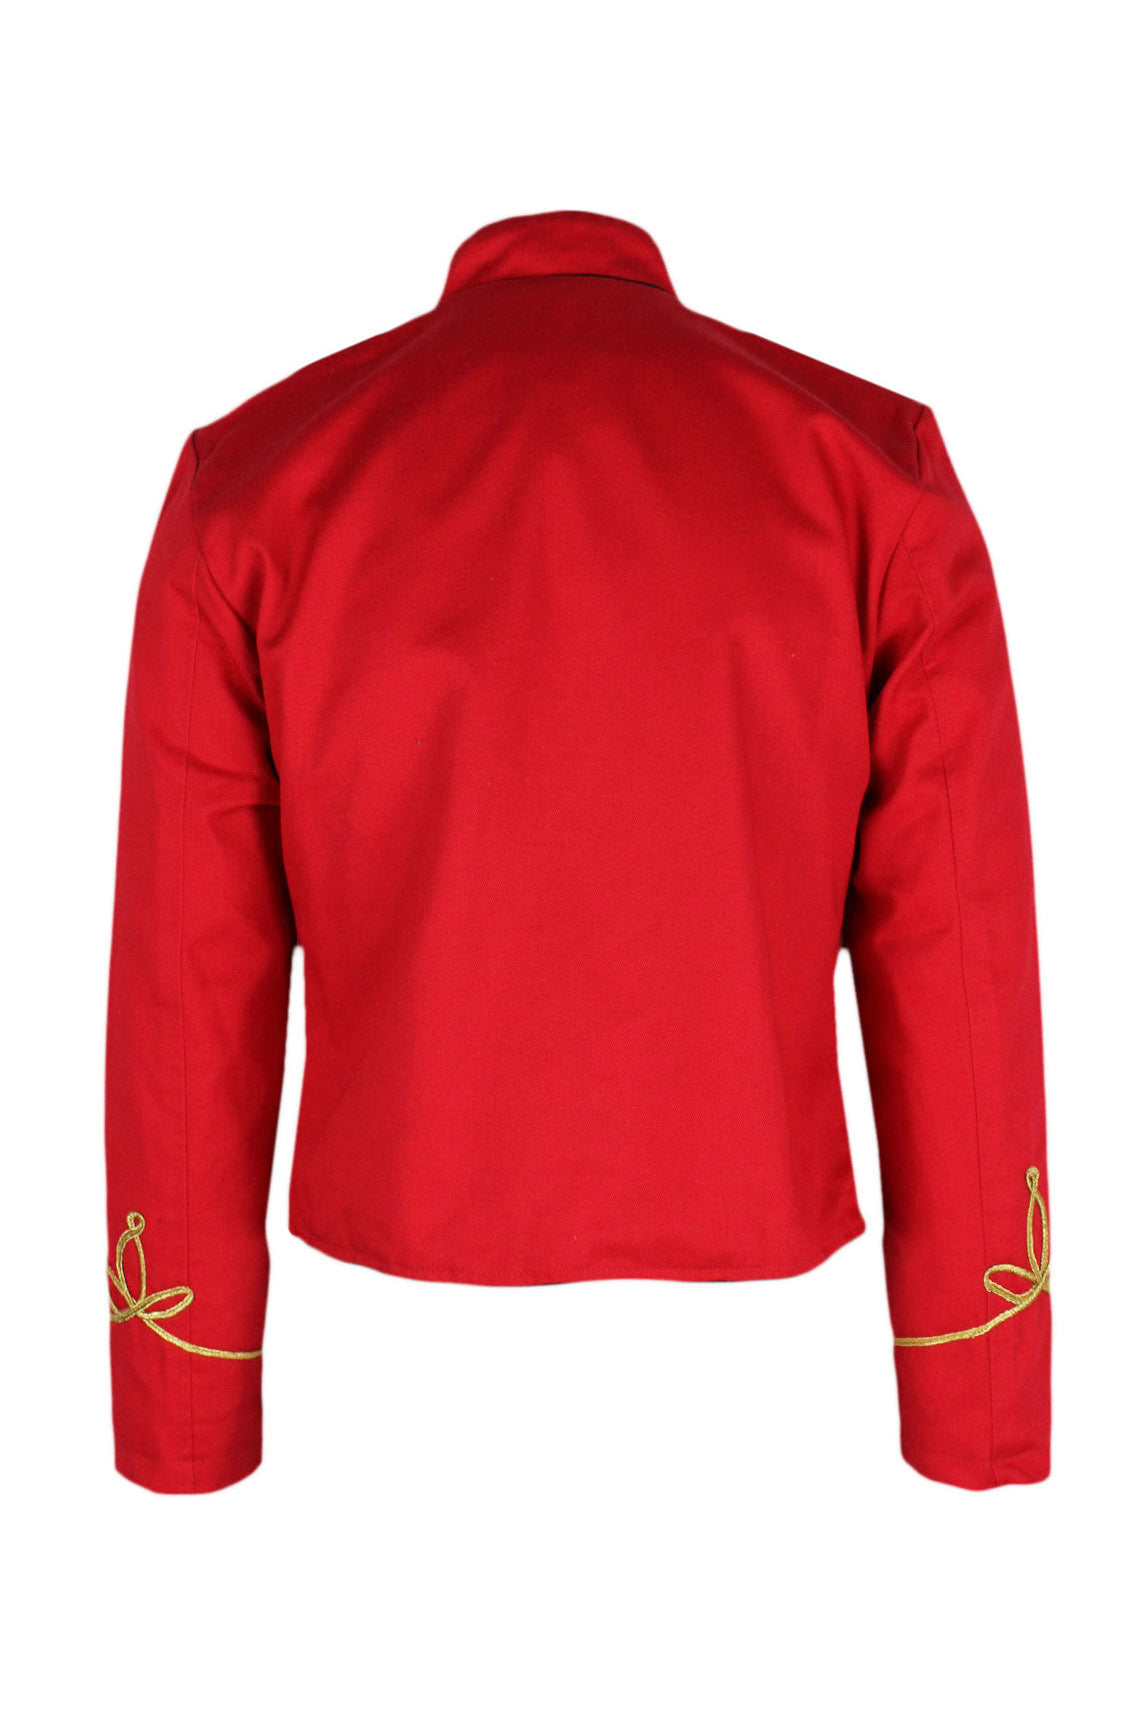 back angle ro rox red drummer parade jacket on masculine mannequin torso.